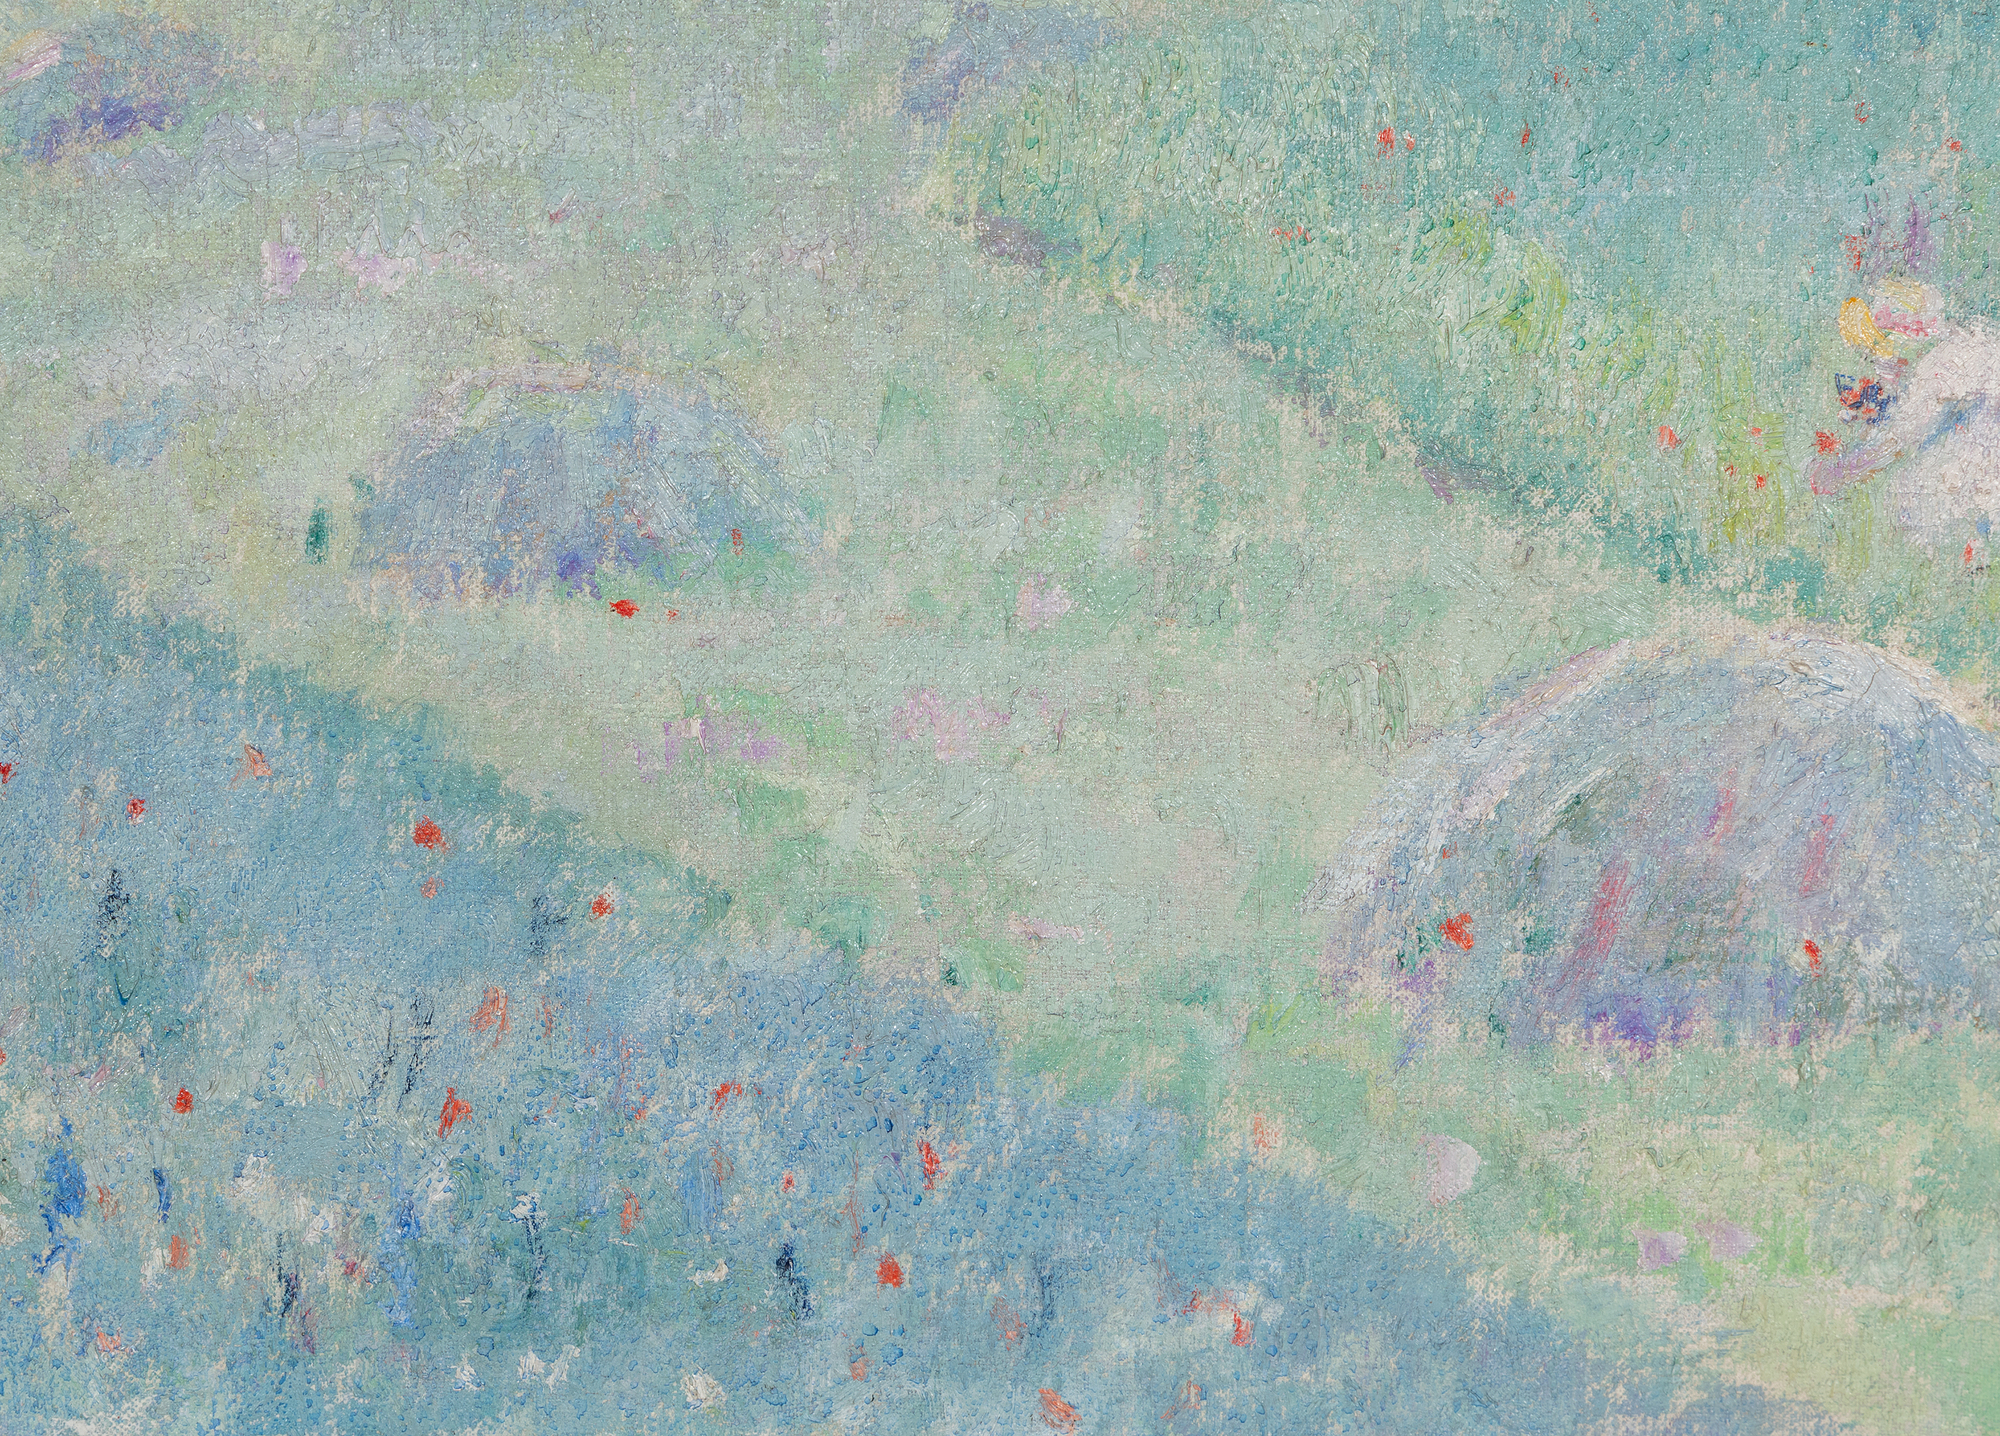 FREDERICK CARL FRIESEKE - Colline à Giverny - huile sur toile - 25 1/4 x 31 1/4 in.